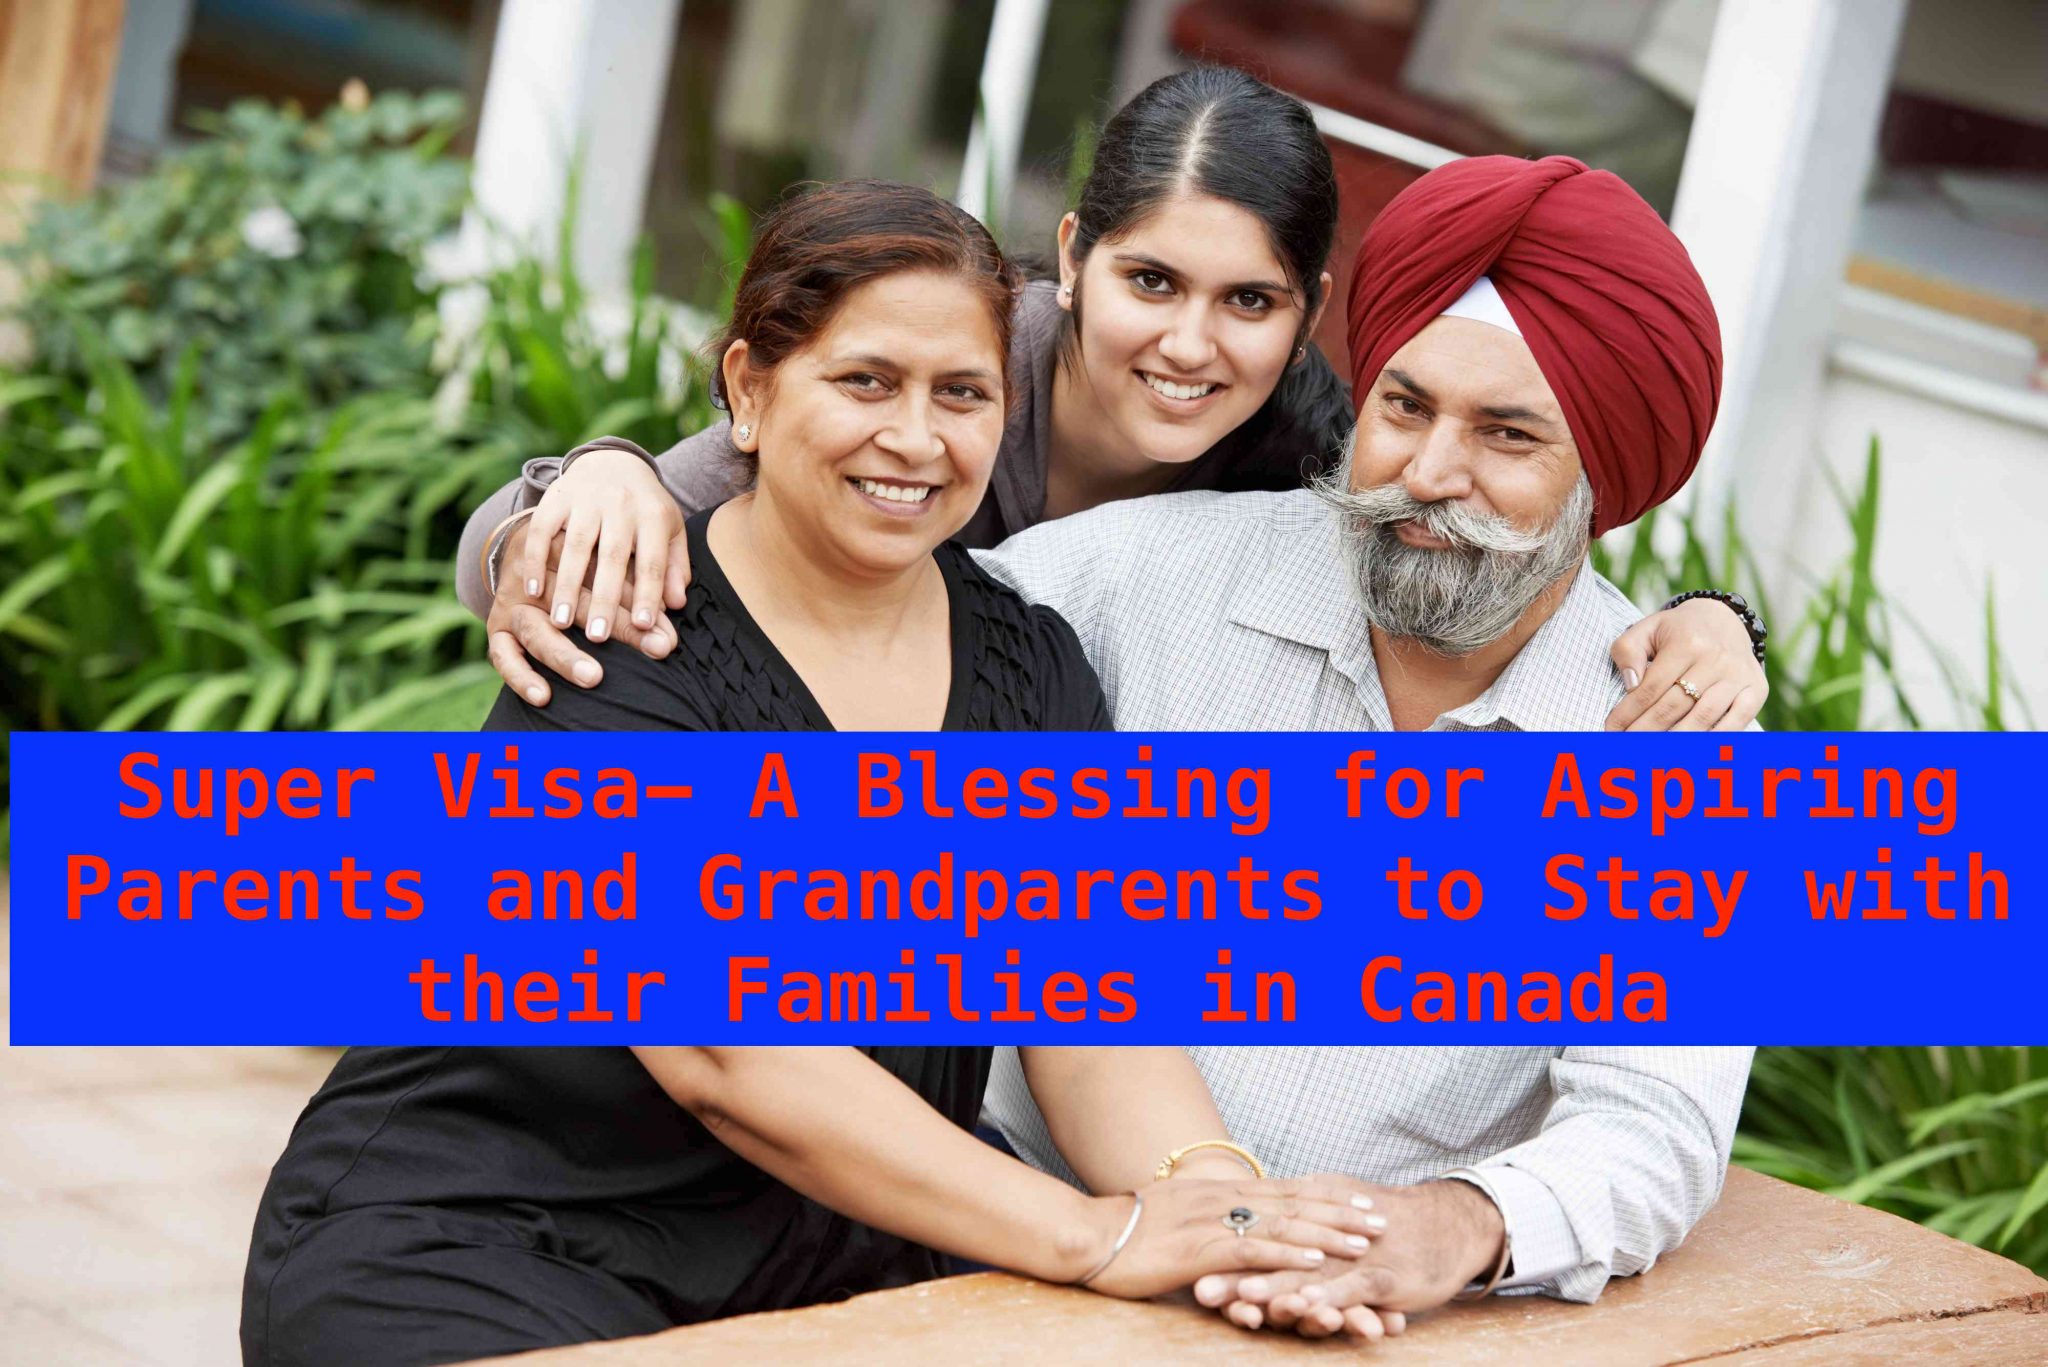 Super Visa- A Blessing for Aspiring Parents and Grandparents to Stay with their Families in Canada